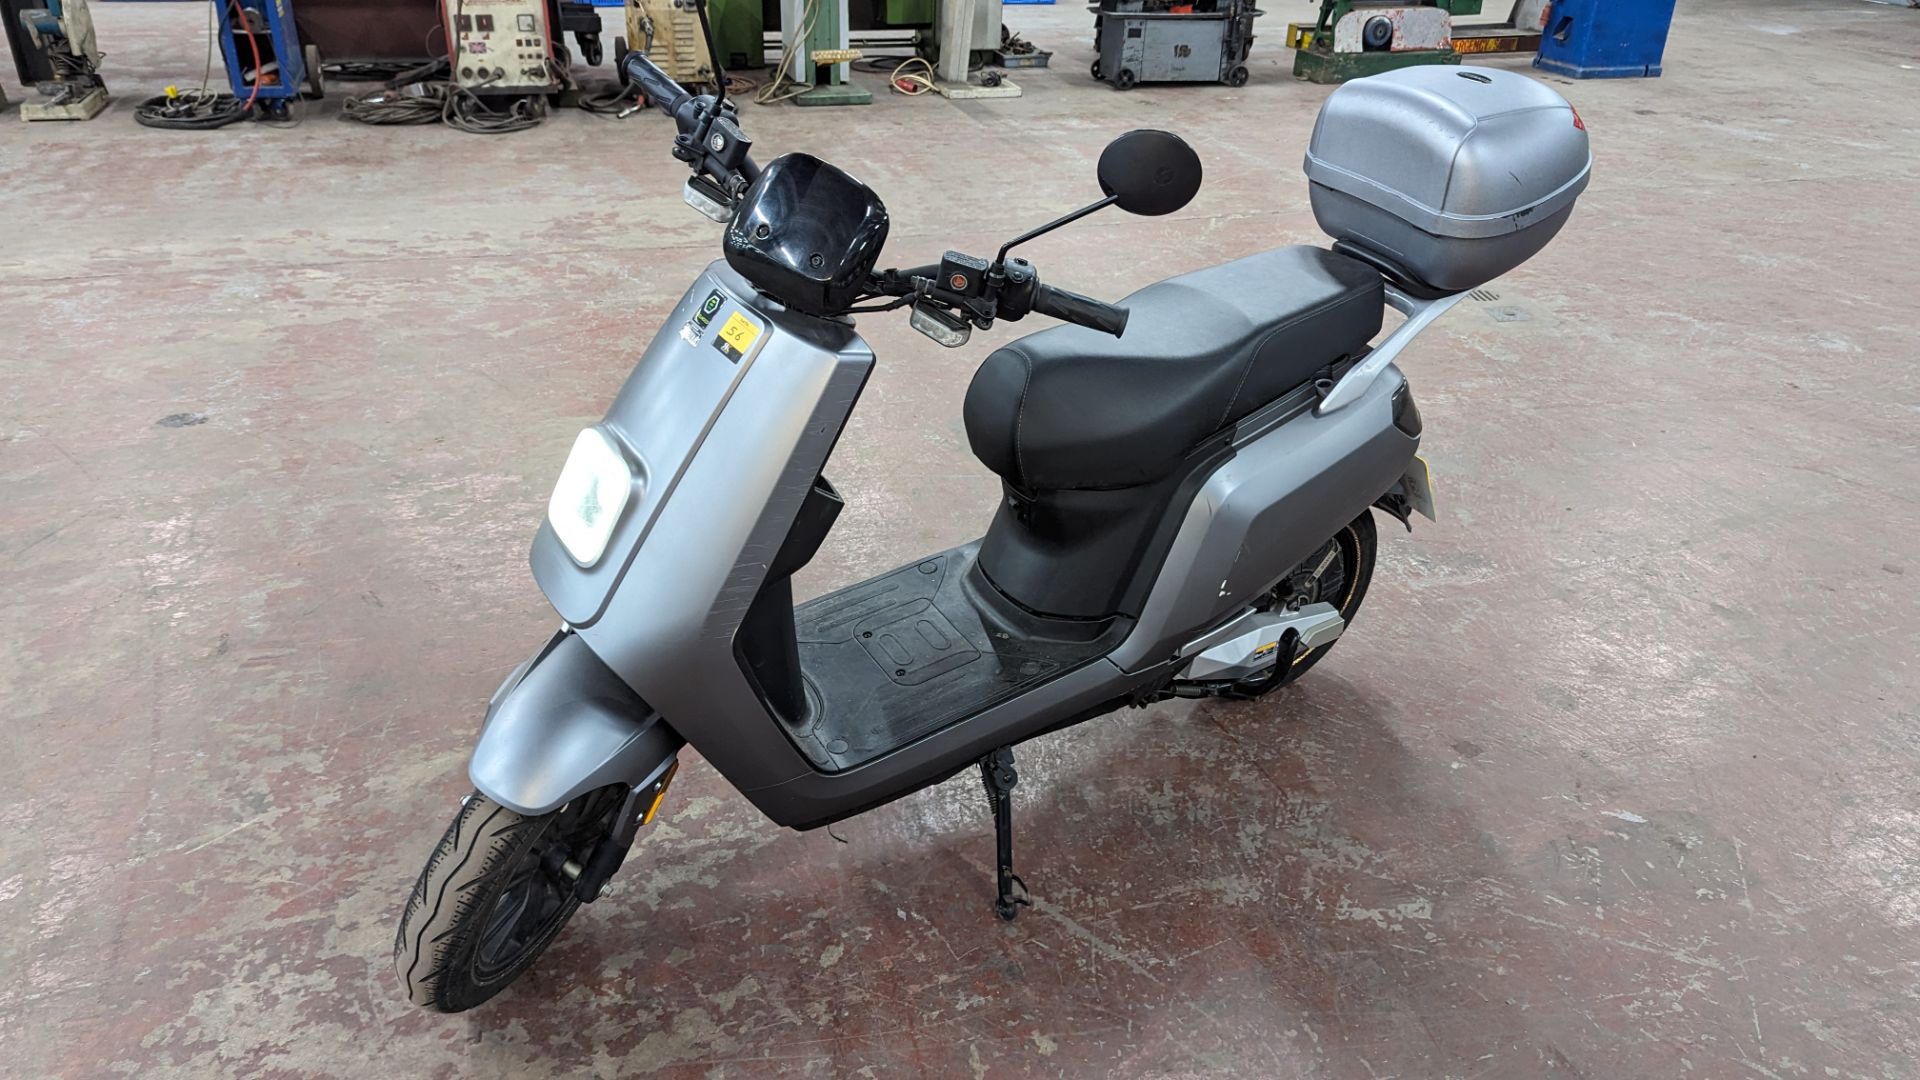 Senda 3000 Electric Moped: Silver/grey, 50cc equivalent, 30mph top speed. Complete with 2 keys to - Image 8 of 13